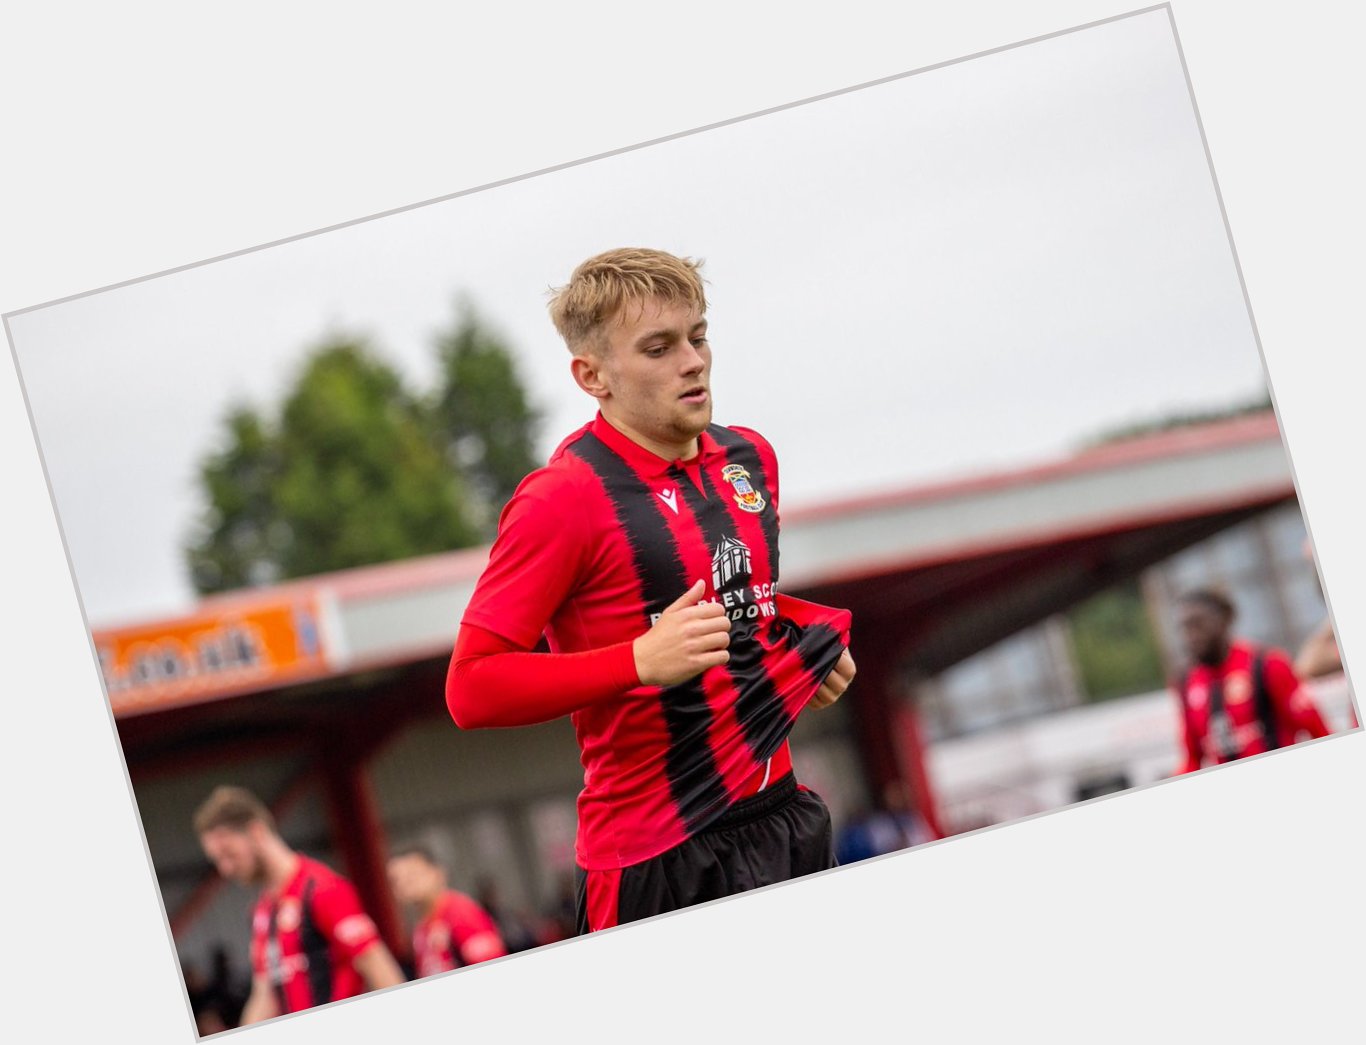 A very happy birthday to Jack Concannon from everyone at Tamworth FC. Have a great day Jack! 